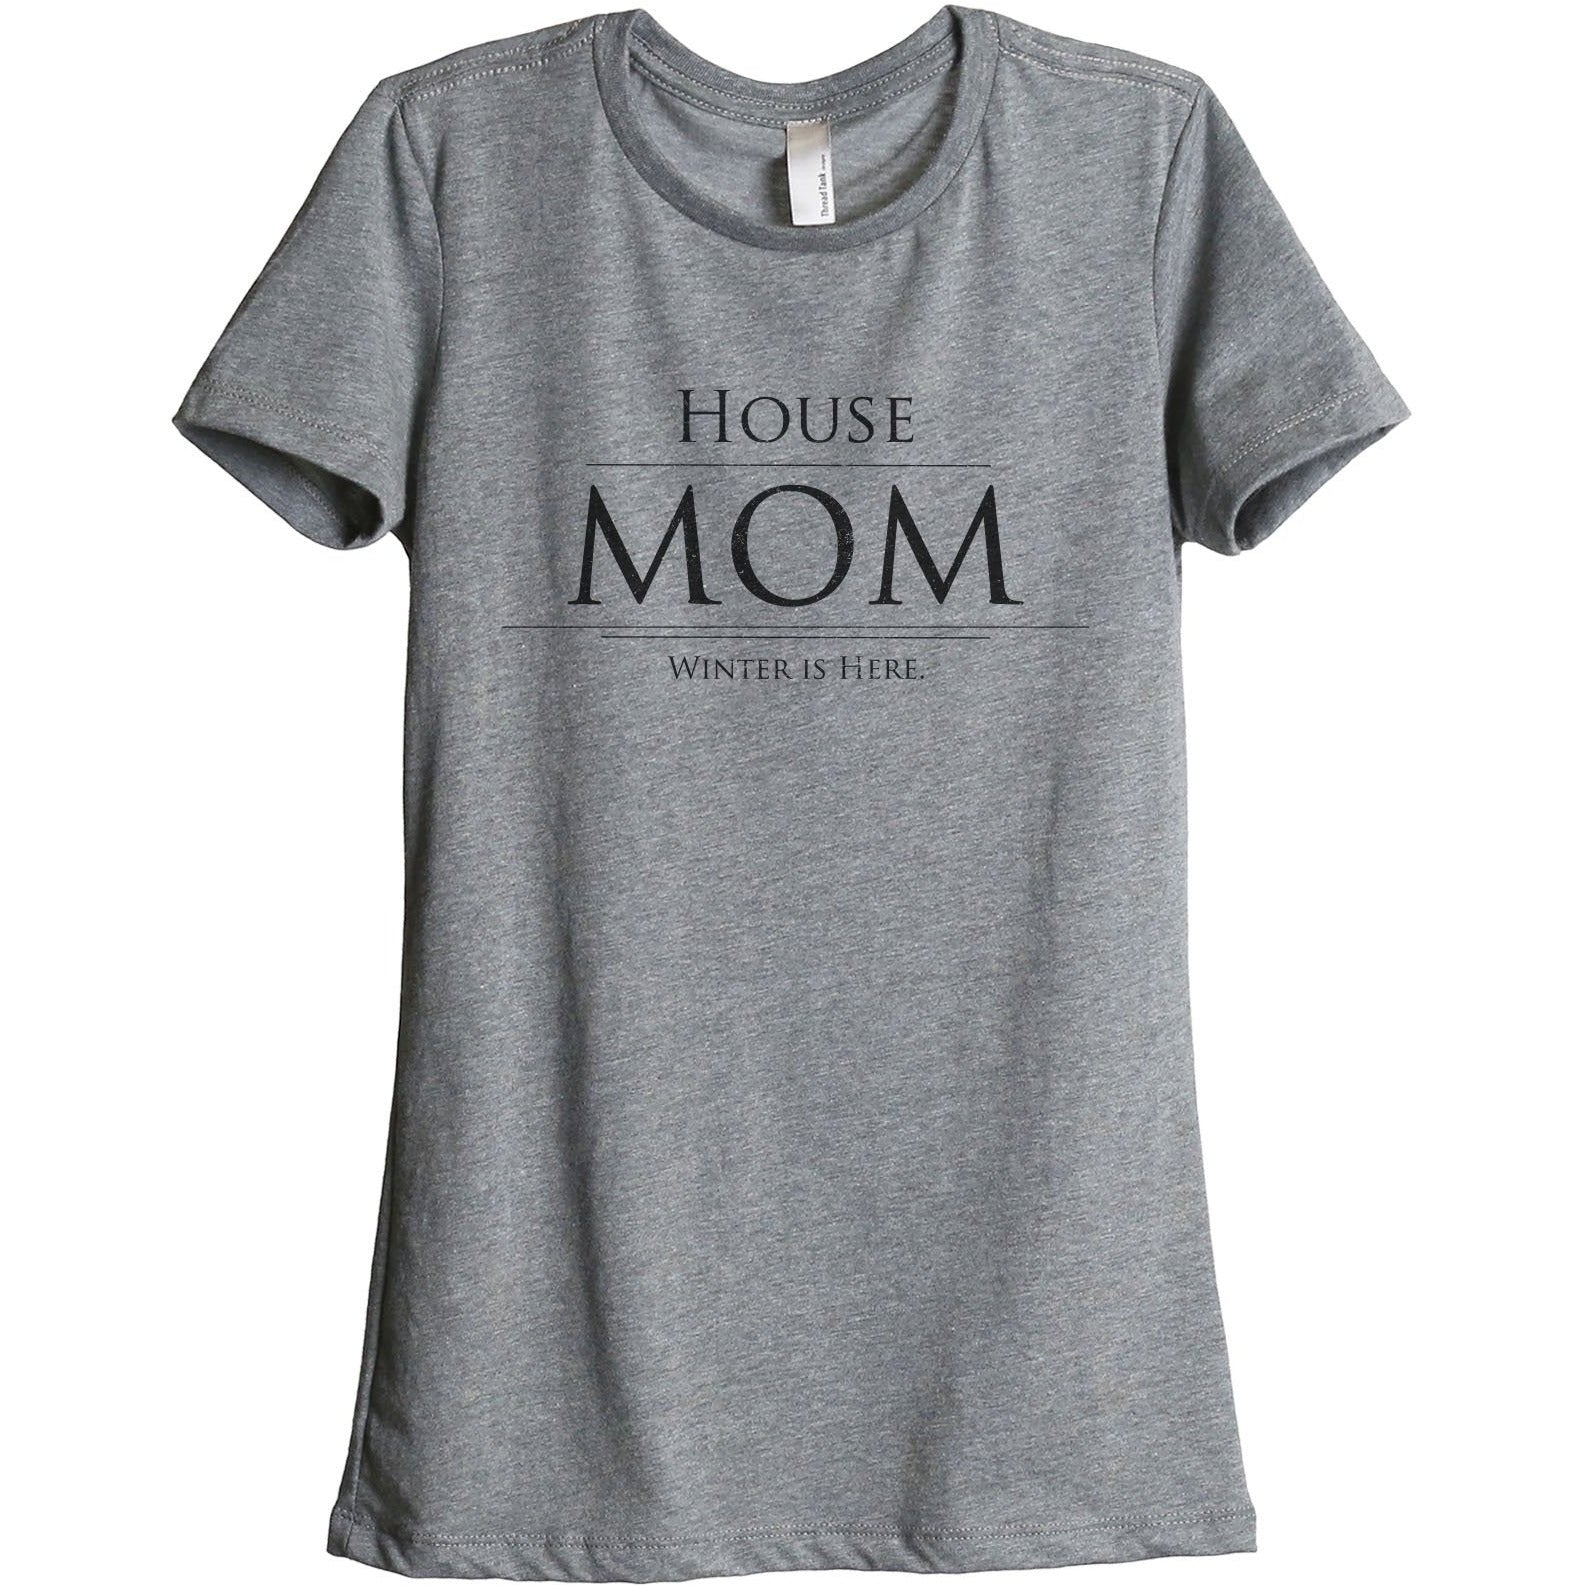 House Mom Winter Is Here Women's Relaxed Crewneck T-Shirt Top Tee Heather Grey